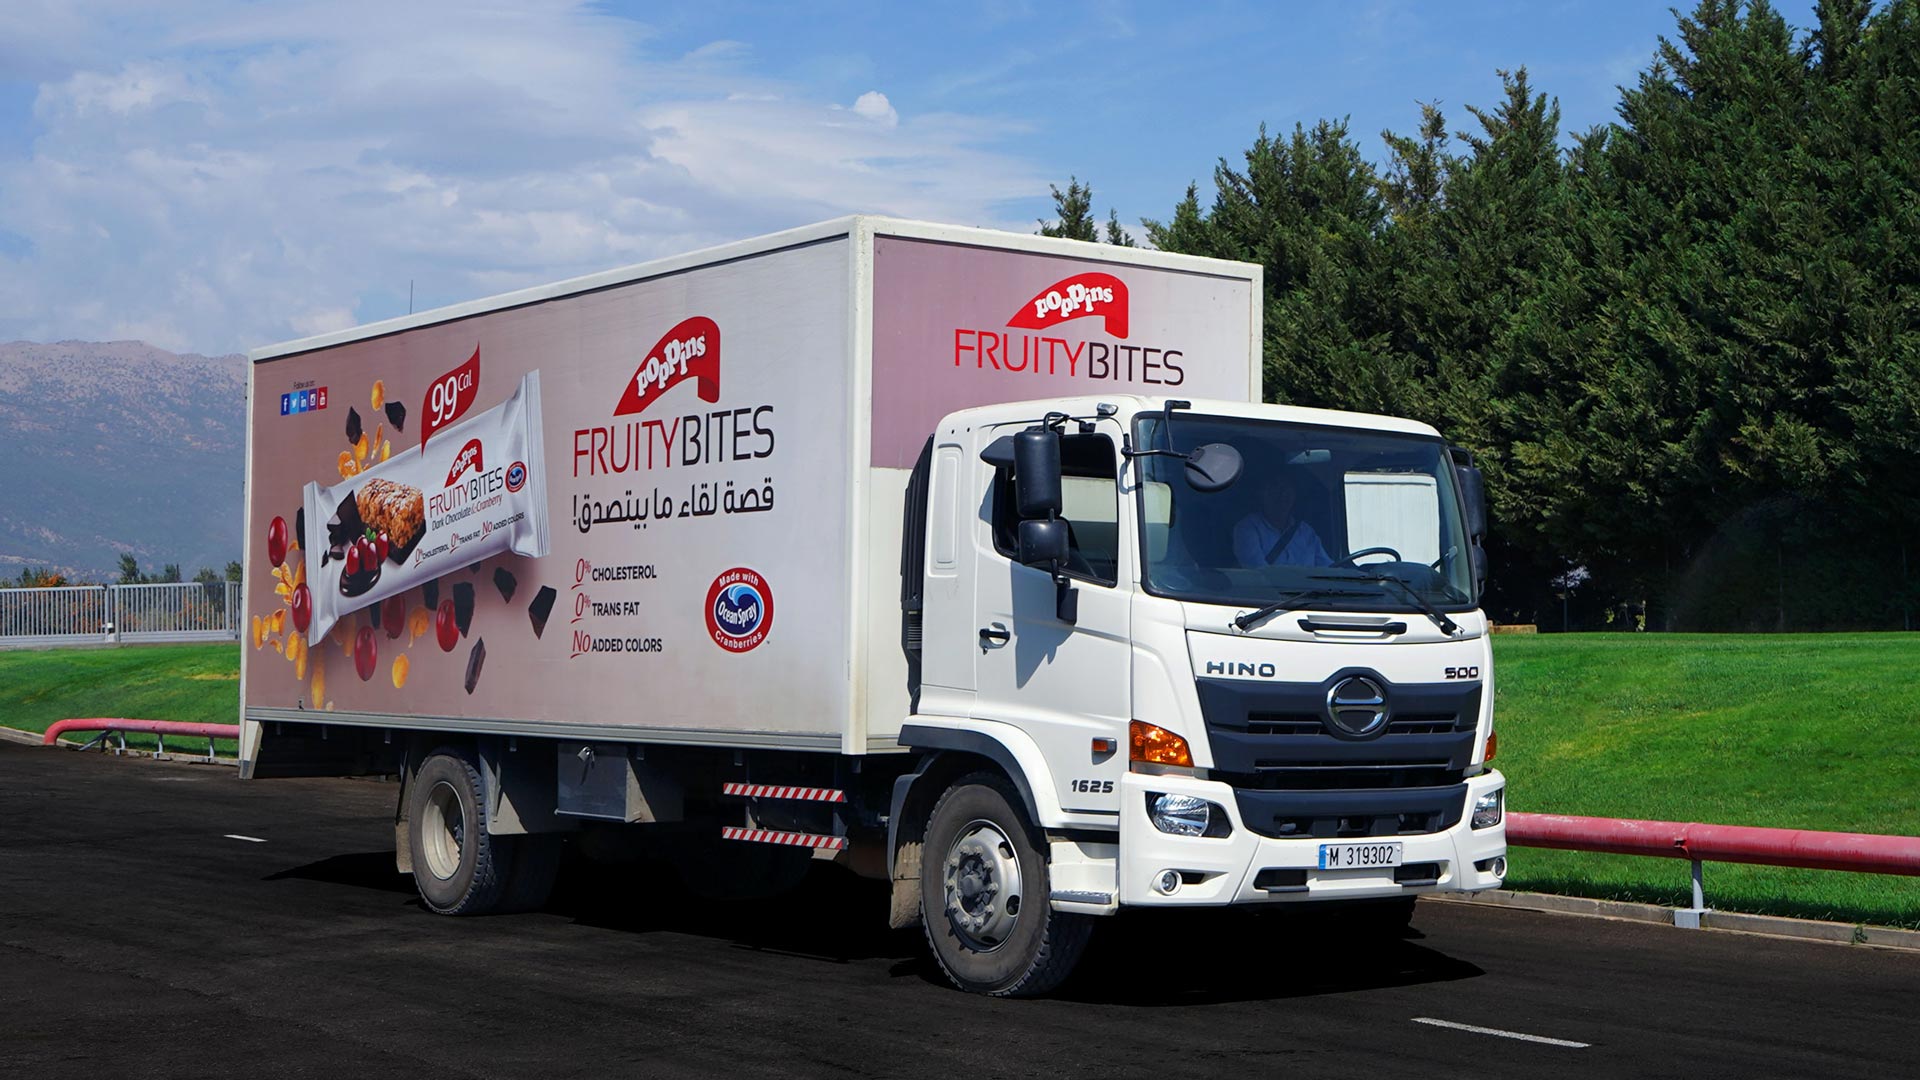 DIFCO Product Shipping Truck Fruity Bites